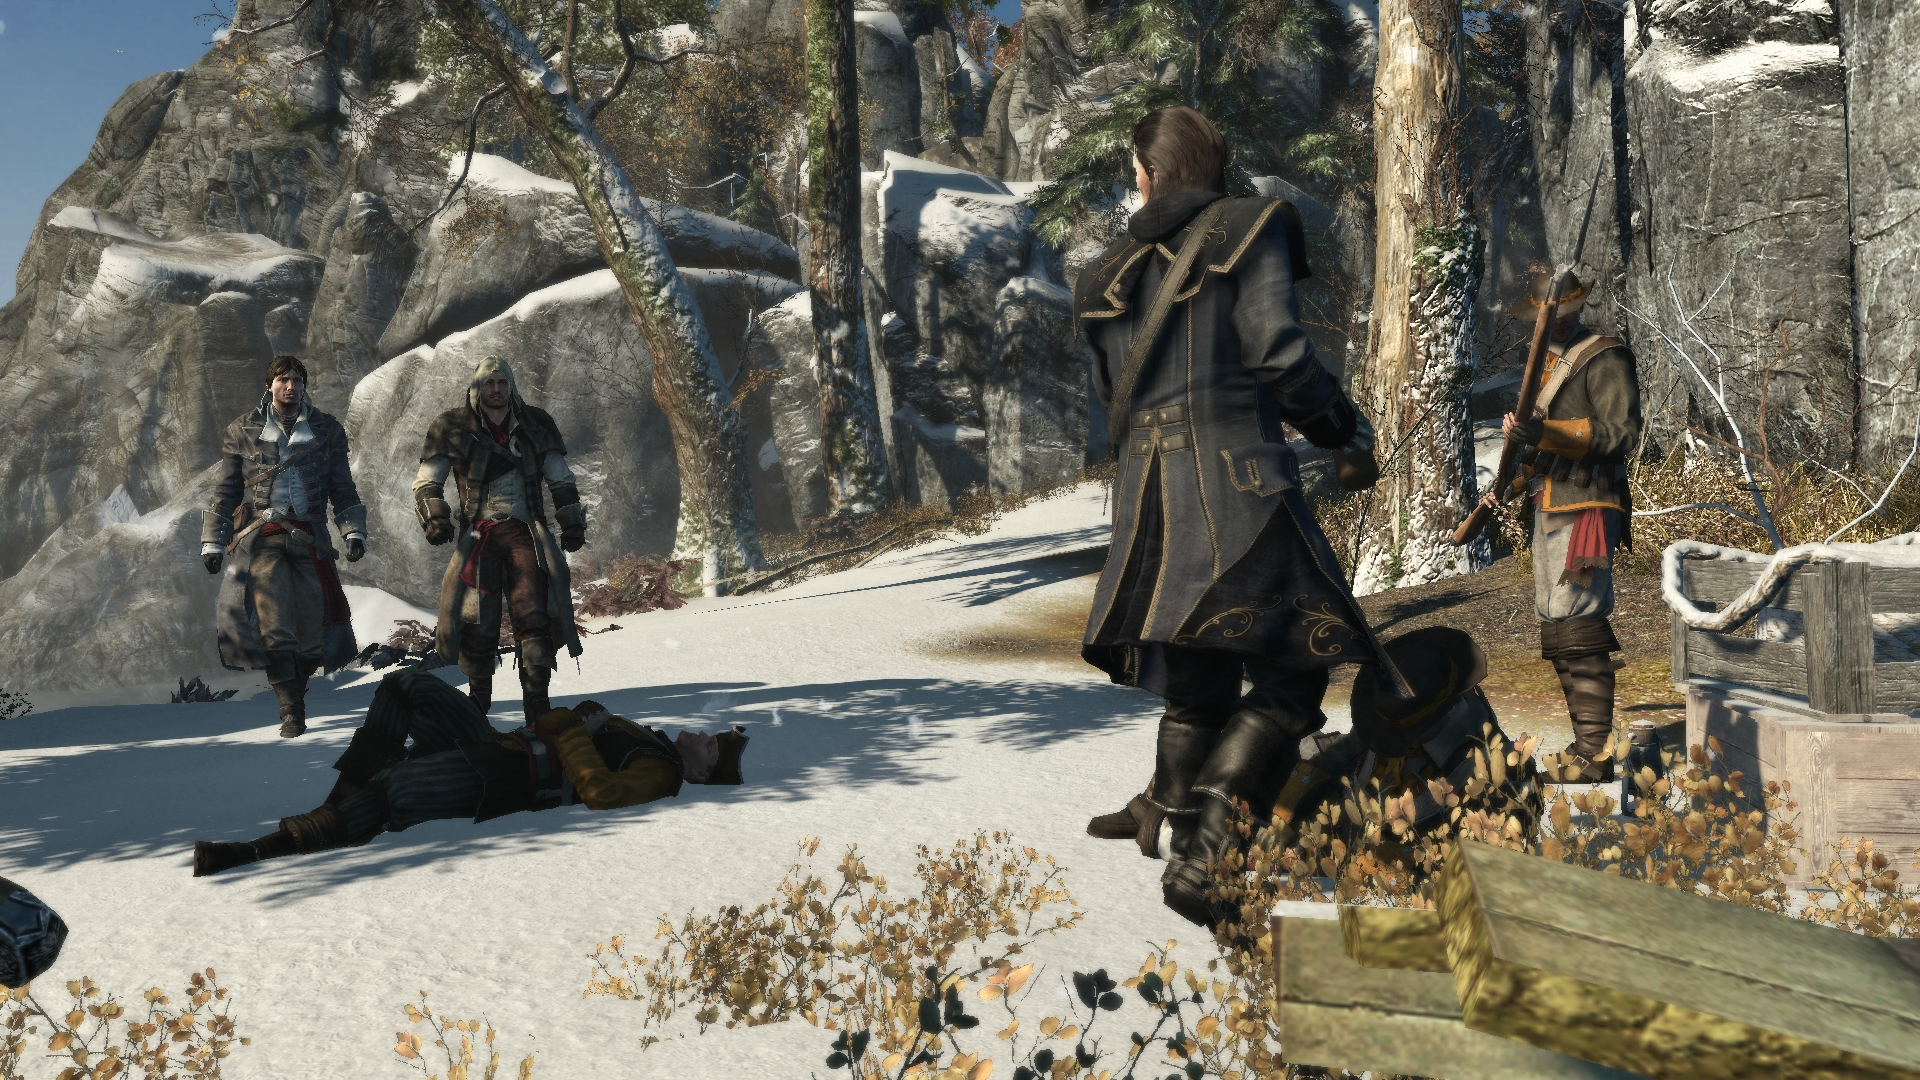 Assassin s xbox 360. Assassin s Creed Rogue 3. Ассасин Крид на хбокс 360 рогуе.